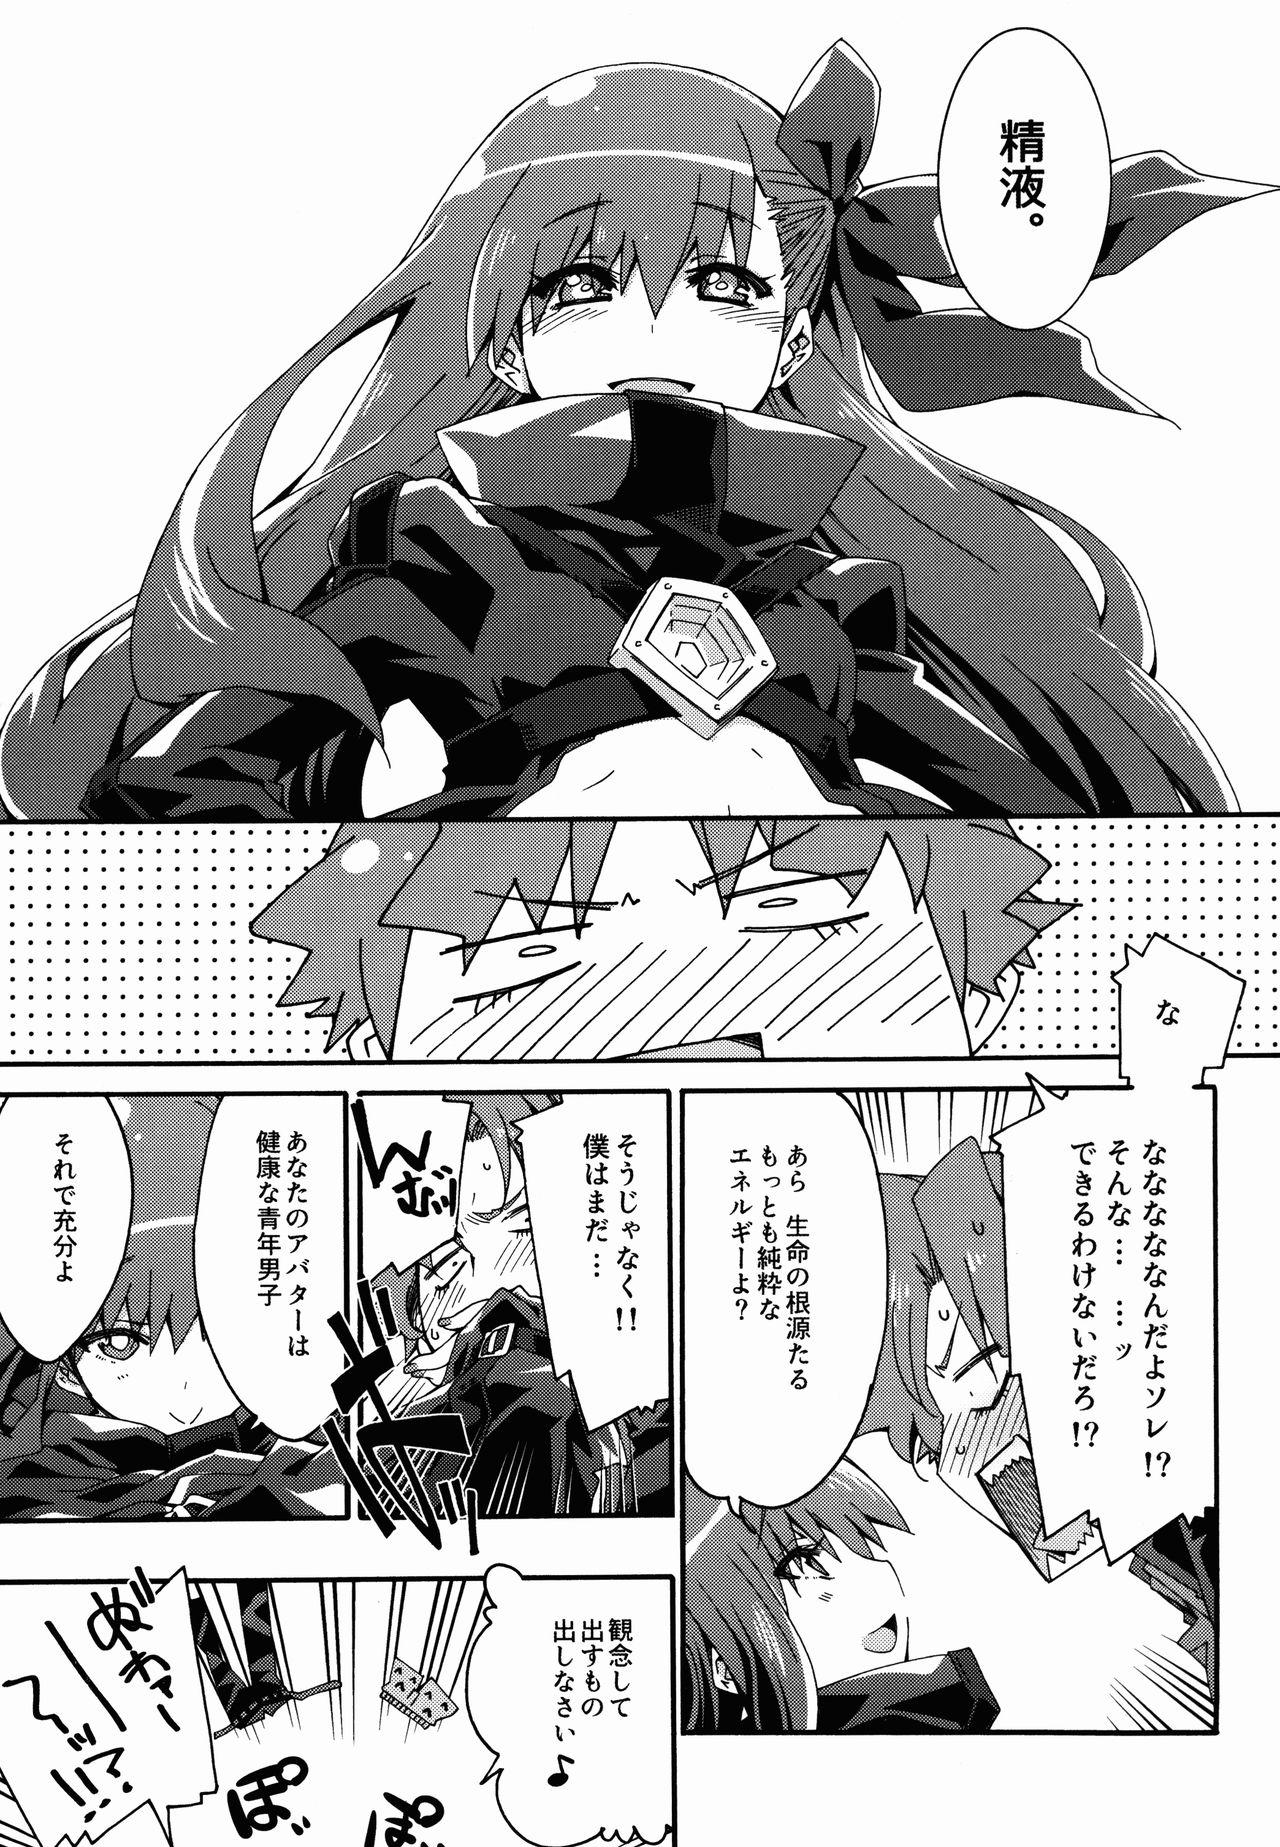 Thot Melty/kiss - Fate extra Internal - Page 11